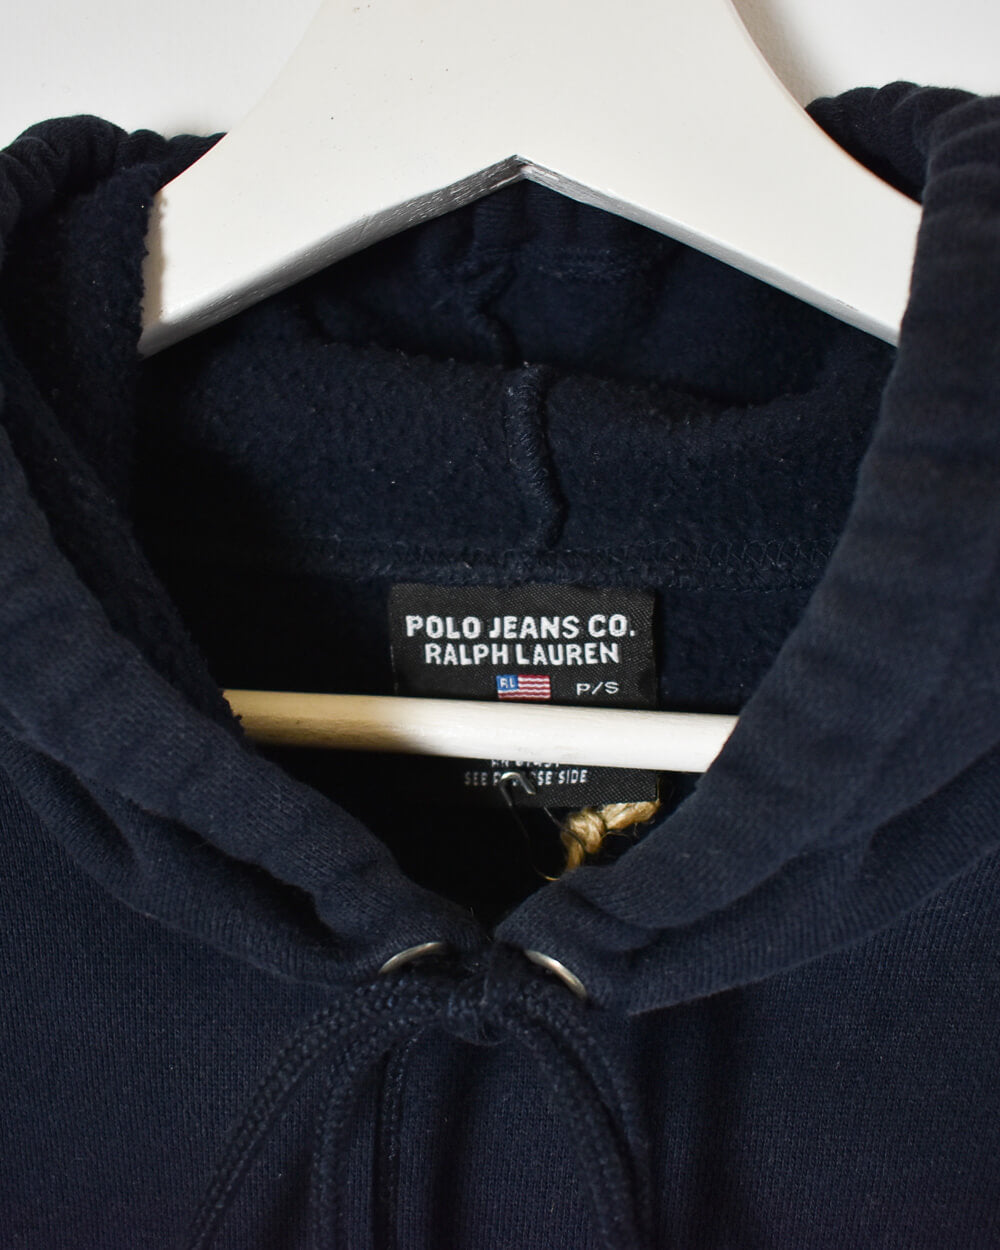 Black Ralph Lauren Polo Jeans Company Hoodie - Small